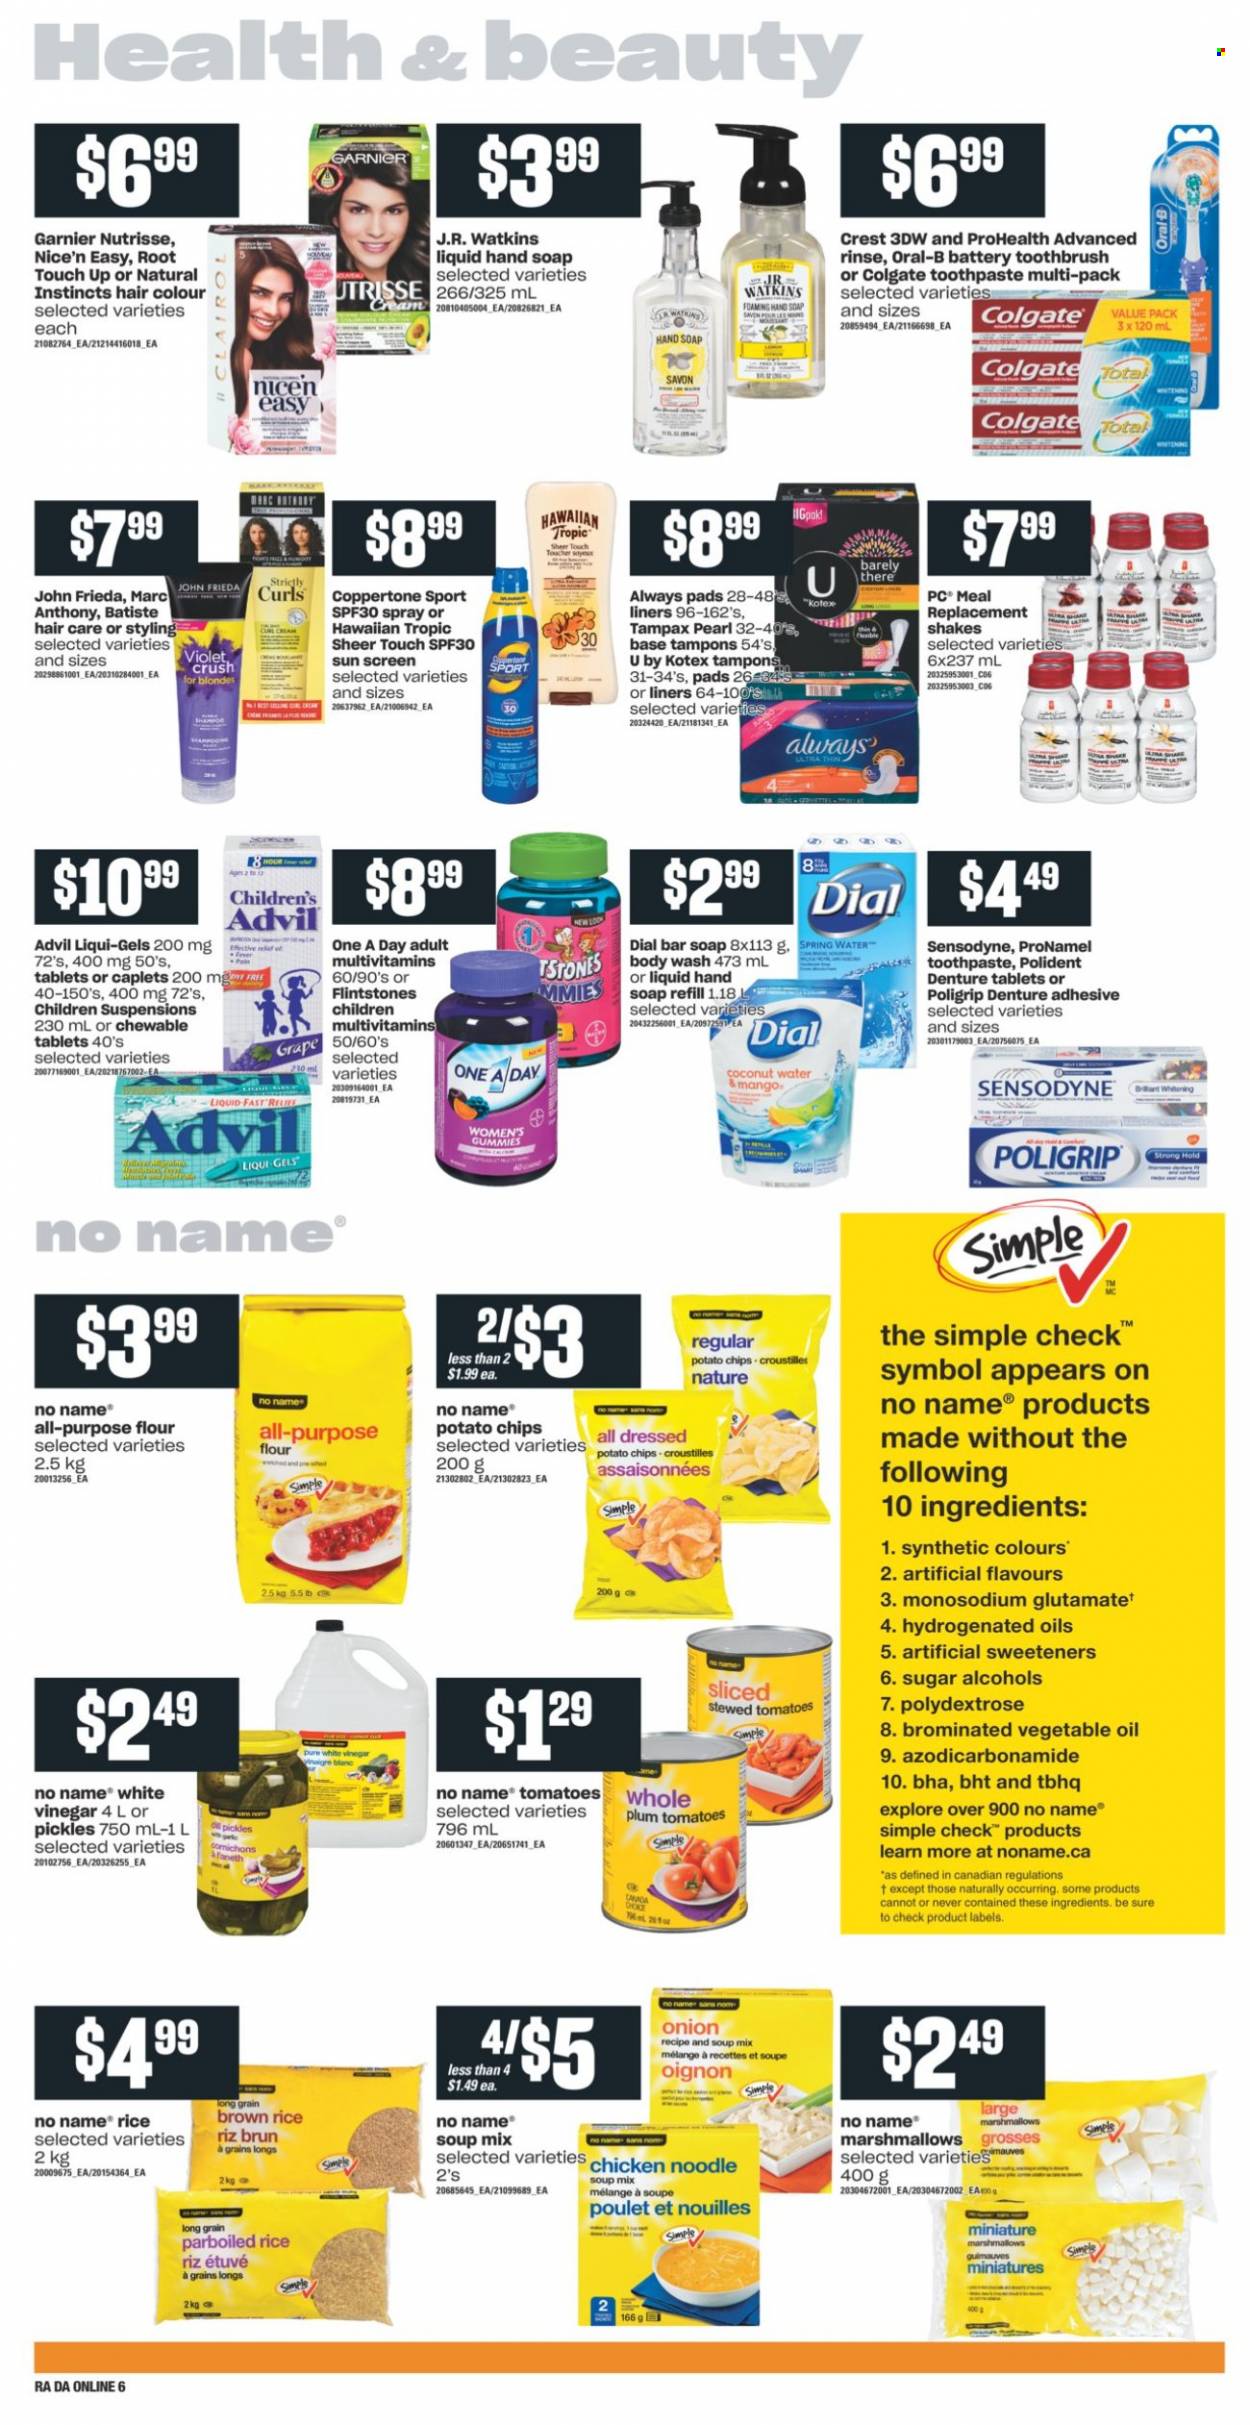 thumbnail - Atlantic Superstore Flyer - September 09, 2021 - September 15, 2021 - Sales products - tomatoes, No Name, soup mix, soup, noodles, shake, marshmallows, potato chips, flour, sugar, pickles, brown rice, rice, parboiled rice, vegetable oil, oil, coconut water, spring water, body wash, hand soap, soap bar, Dial, soap, toothbrush, toothpaste, Polident, Crest, Always pads, Kotex, tampons, hair color, John Frieda, Sure, multivitamin, Advil Rapid, Colgate, Garnier, Tampax, Oral-B, chips, Sensodyne. Page 10.